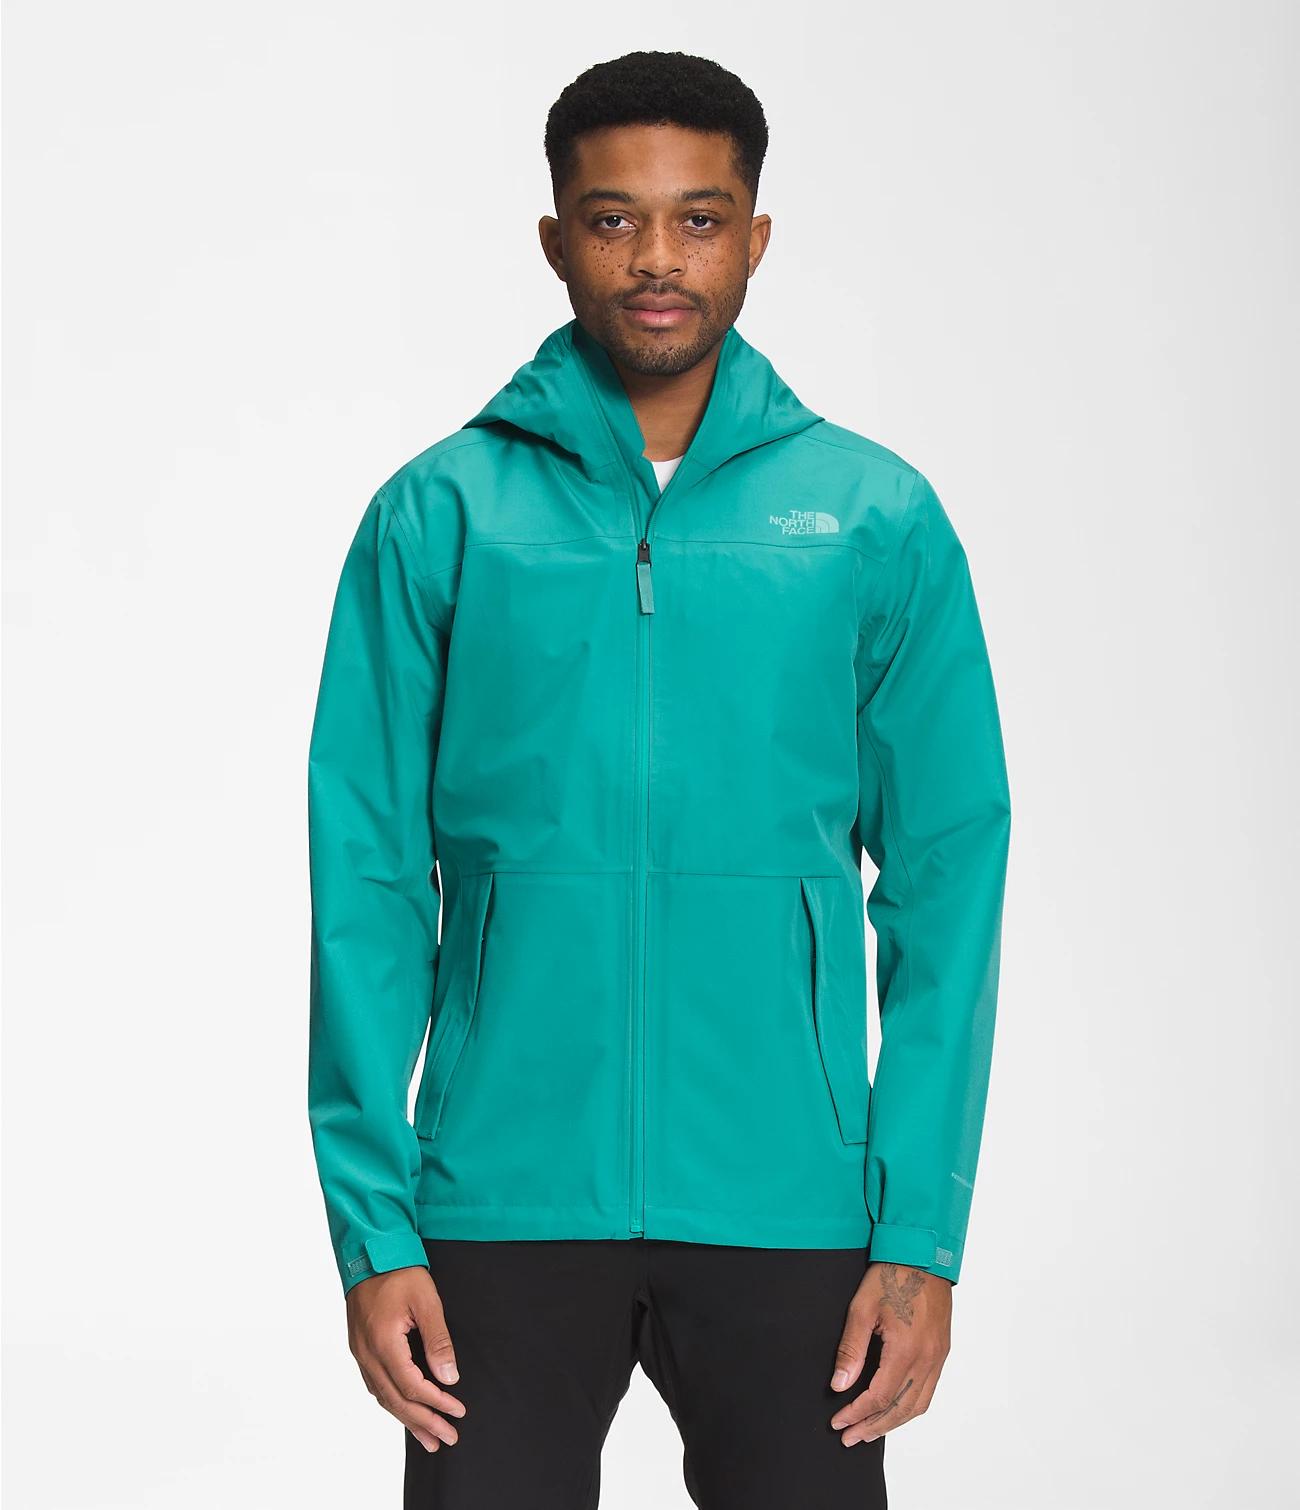 Men’s Dryzzle FUTURELIGHT™ Jacket by THE NORTH FACE